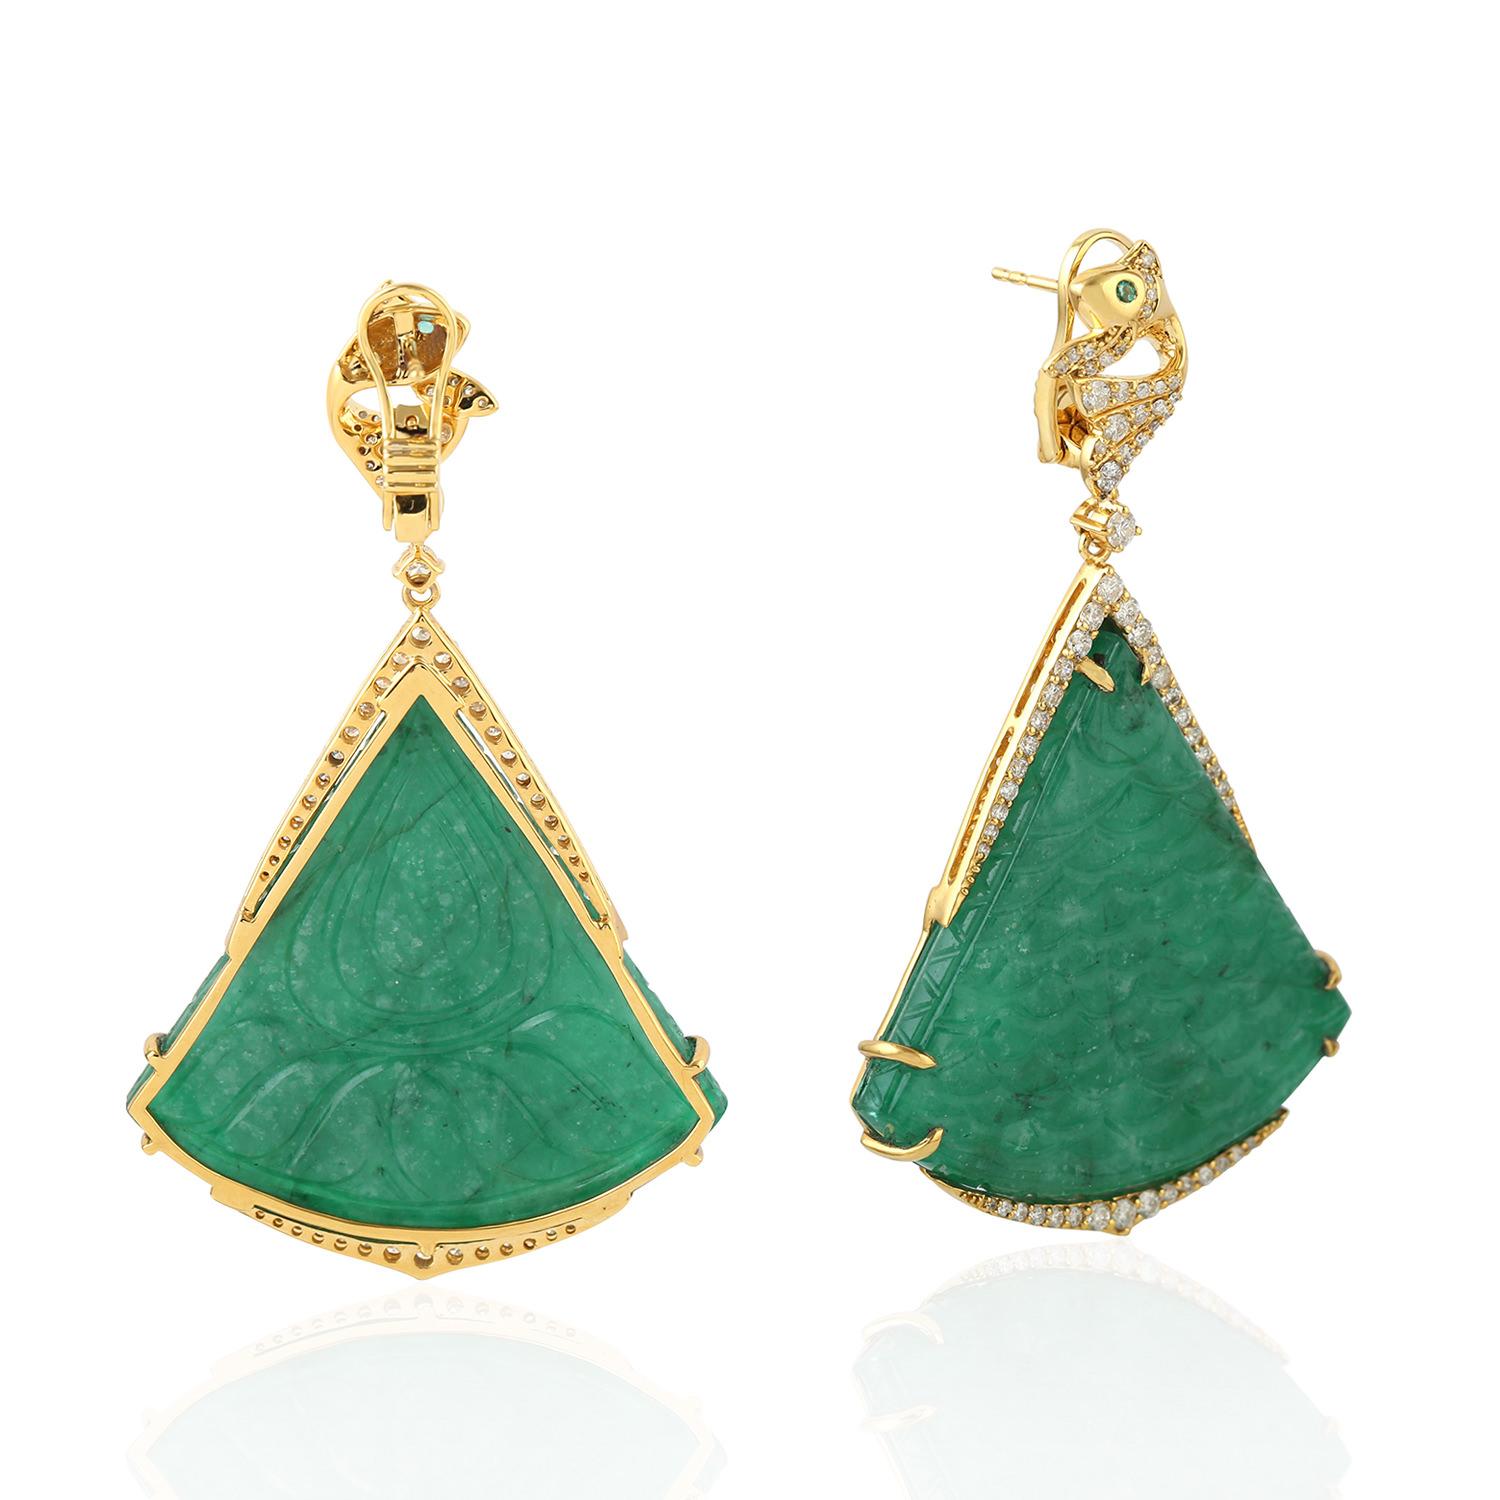 These stunning hand carved emerald earrings are thoughtfully and meticulously crafted in 18-karat gold. It is set in 106.99 carats emerald and 1.84 carats of diamonds. 

FOLLOW  MEGHNA JEWELS storefront to view the latest collection & exclusive